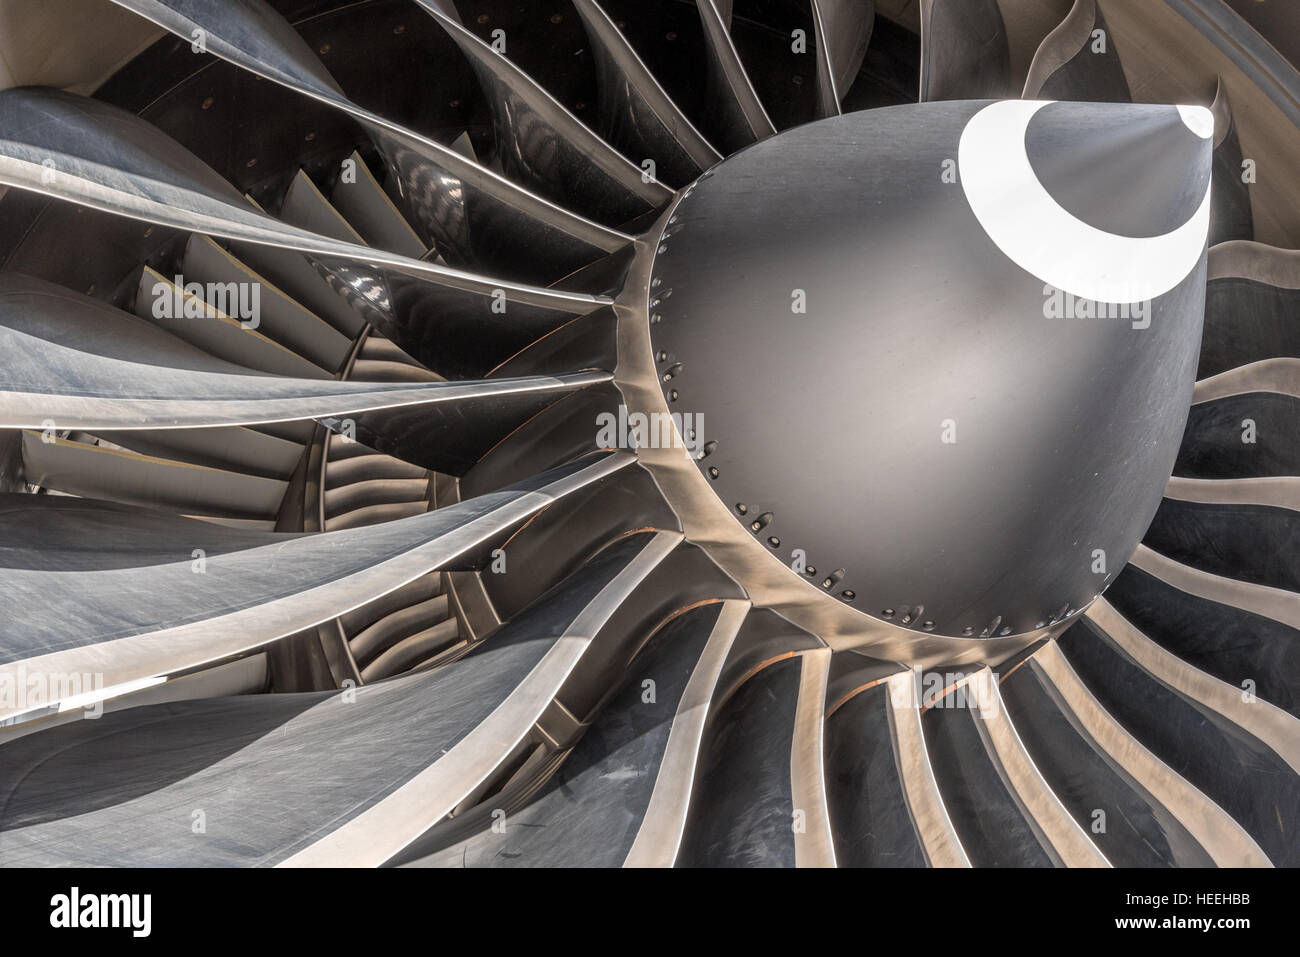 N1 fan blades on a large General Electric GE90 high bypass ratio turbine engine powering large modern airliners Stock Photo